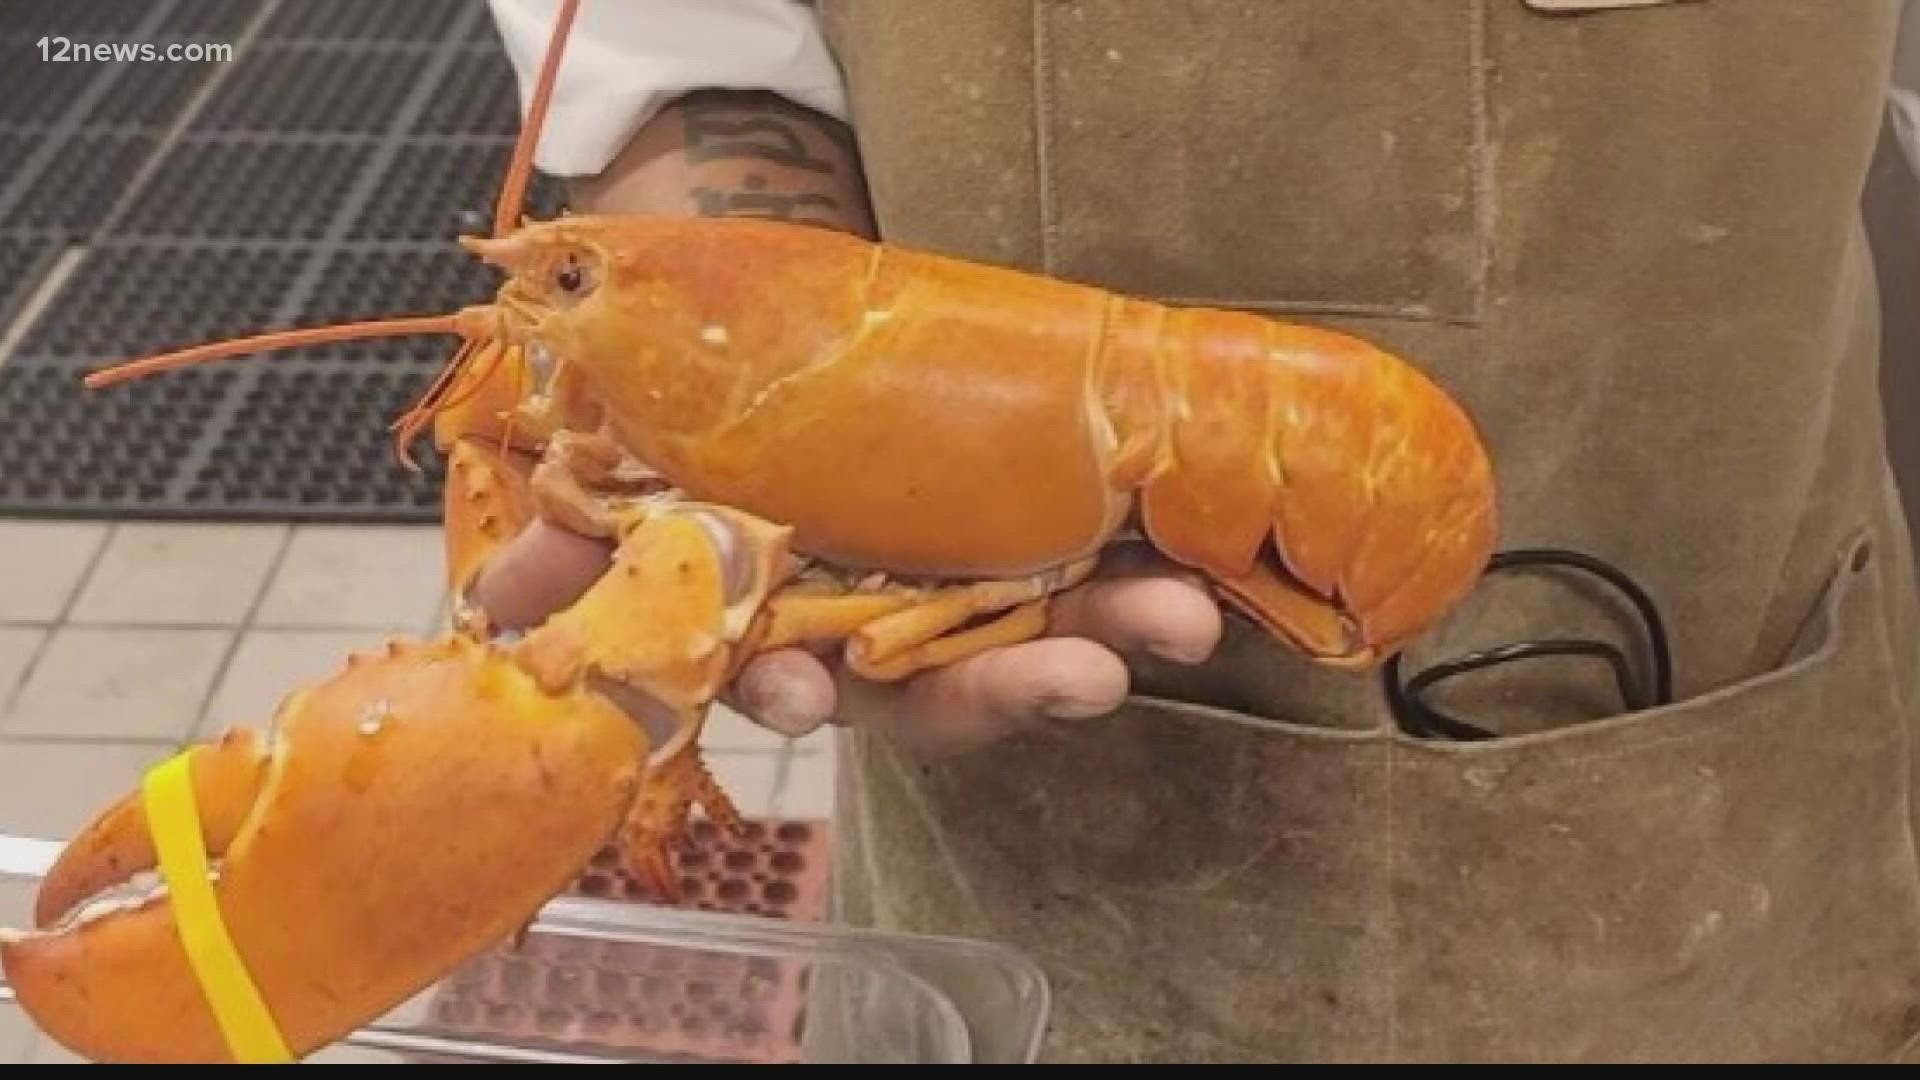 A pumpkin-colored lobster made its way to an Arizona restaurant, but it had nothing to do with any fall-themed menu items.